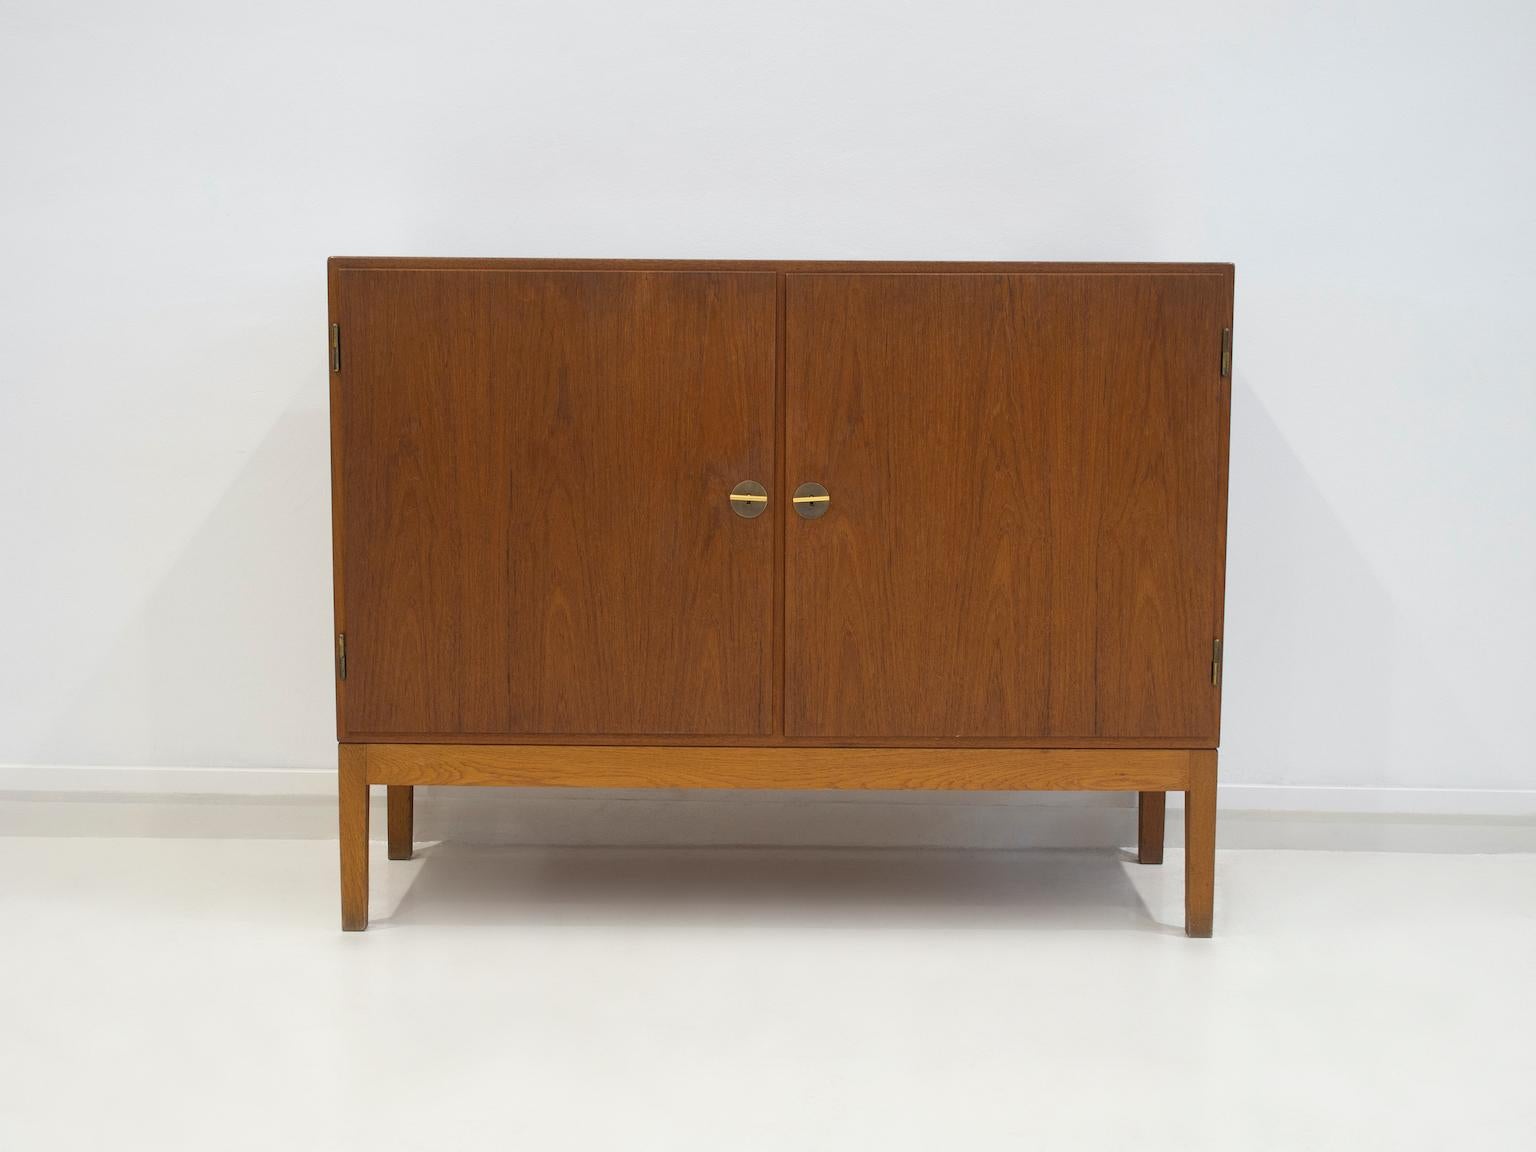 Børge Mogensen sideboard of teak with two doors in the front. Inside with shelves and pullout trays. Please note that the feet are not original and are made of oak. Brass keys that serve as handles are also added later. Manufactured by FDB møbler,